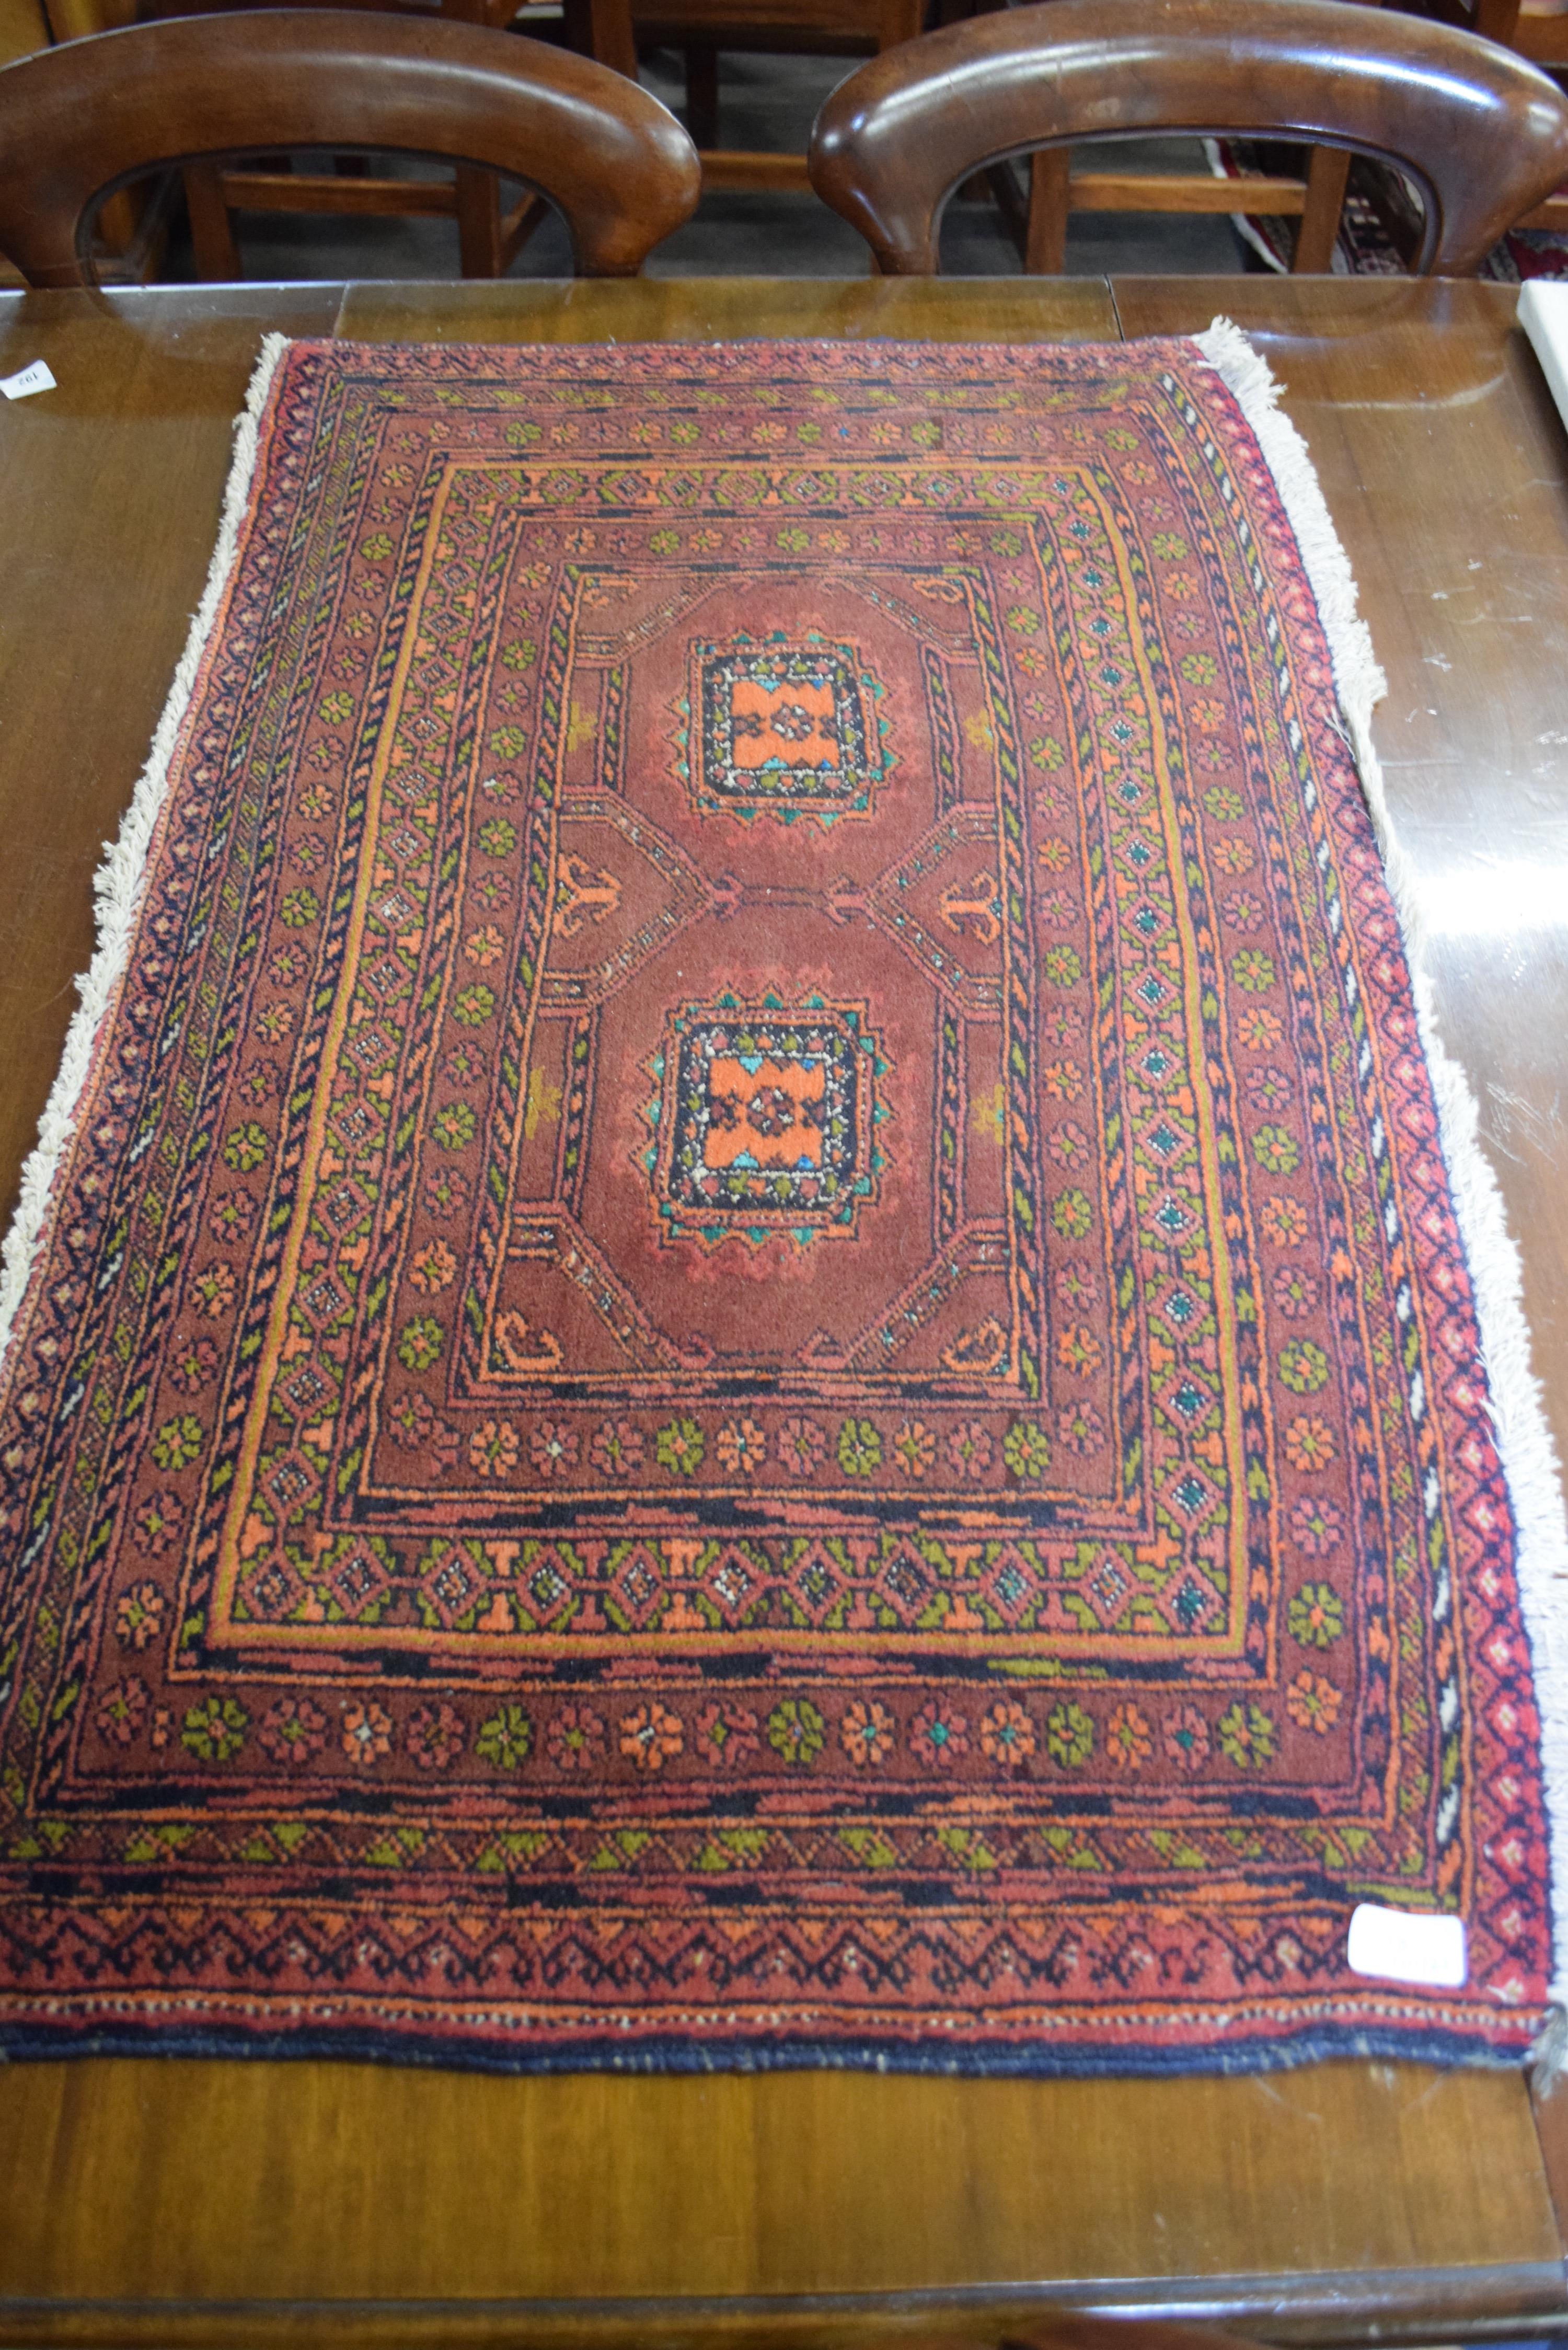 Small Middle Eastern wool carpet or prayer mat decorated with central lozenge on a principally red